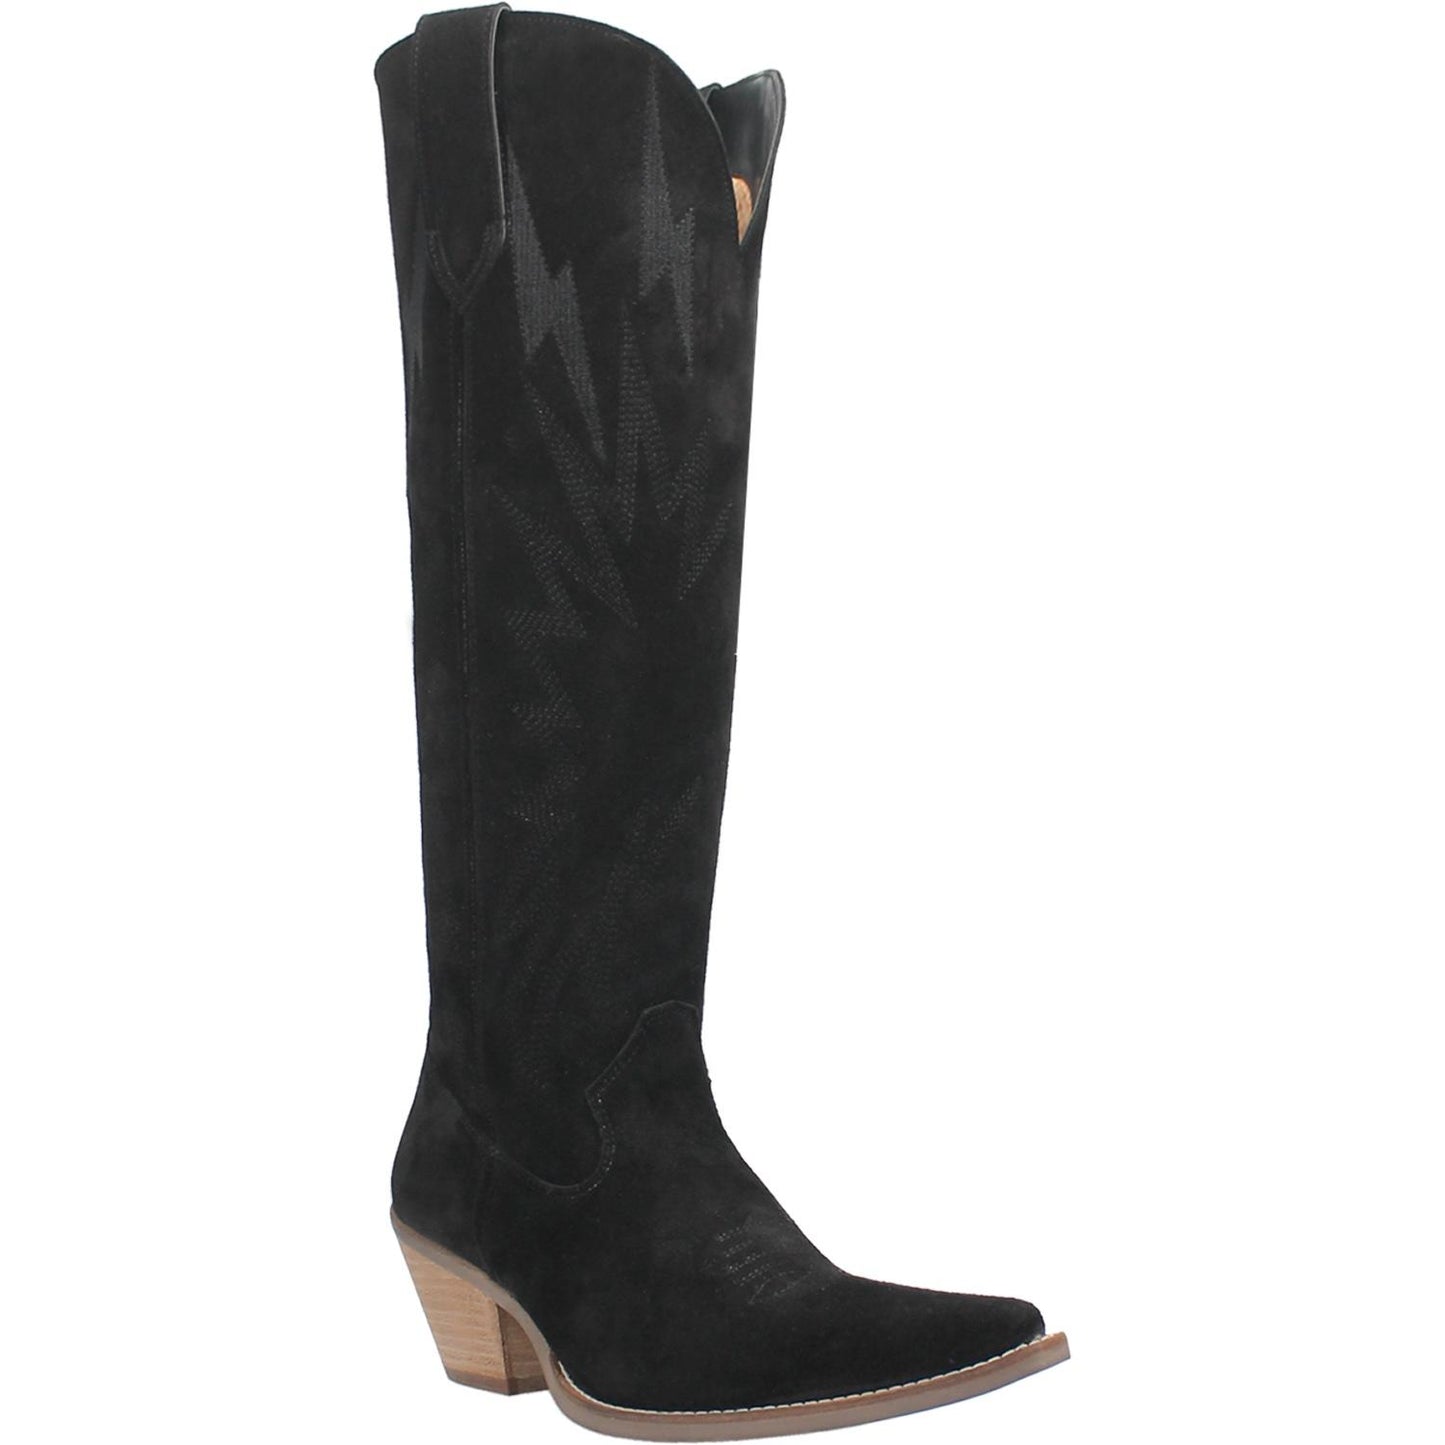 DI597 Women's Thunder Road 16 inch Leather Boot by Dingo